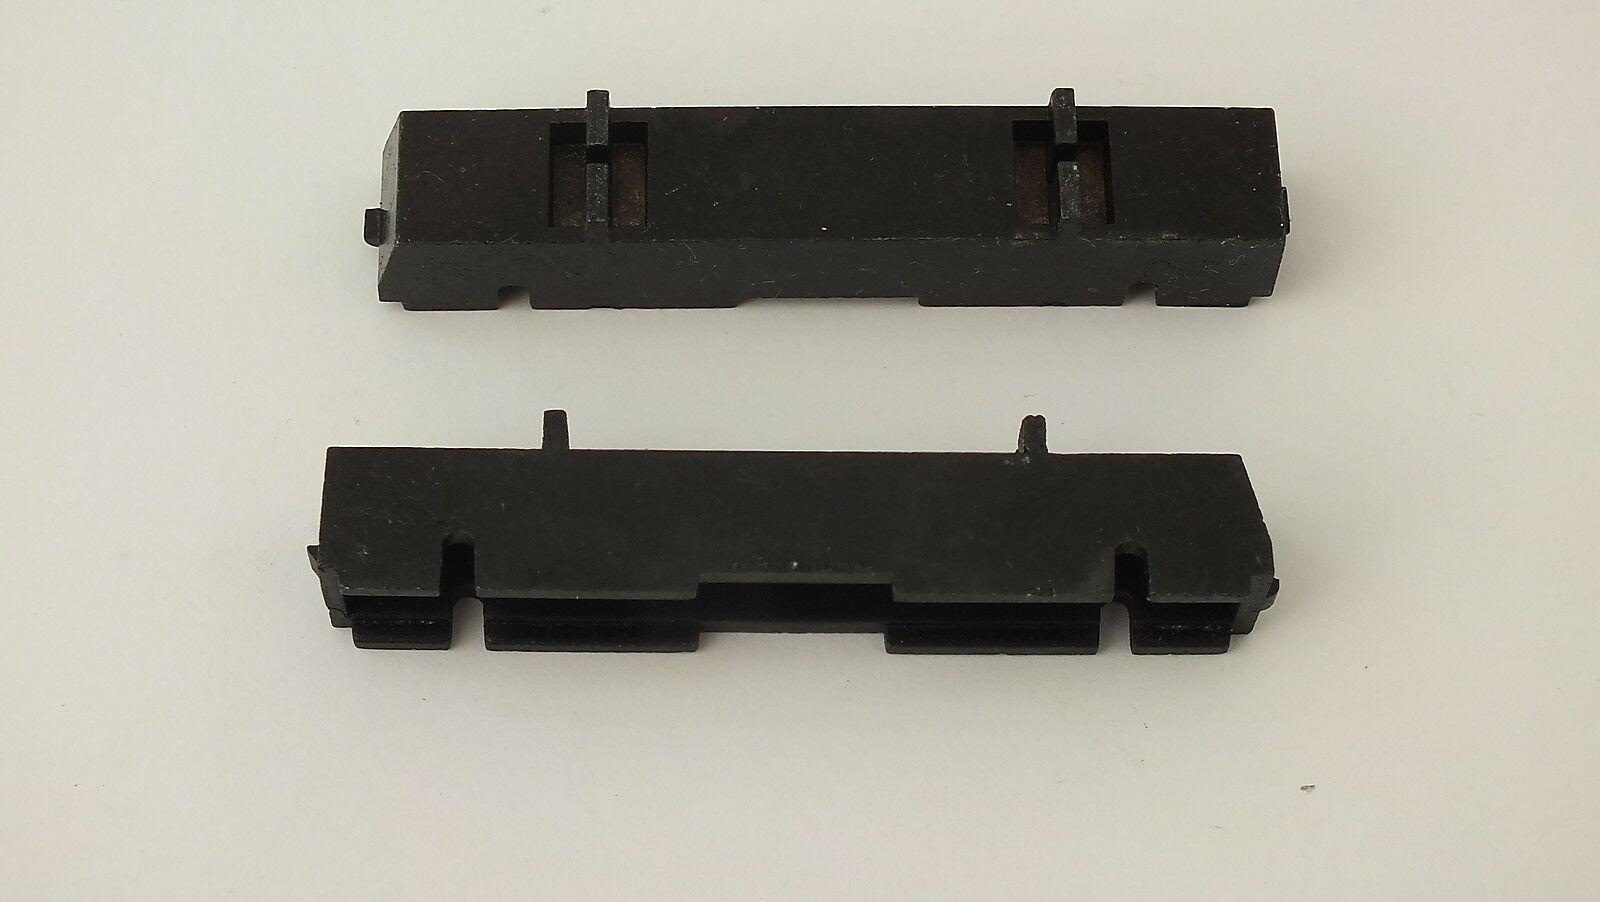 S4543   HORNBY TRIANG CHASSIS NON POWERED BOGIE METAL X 2      N2B